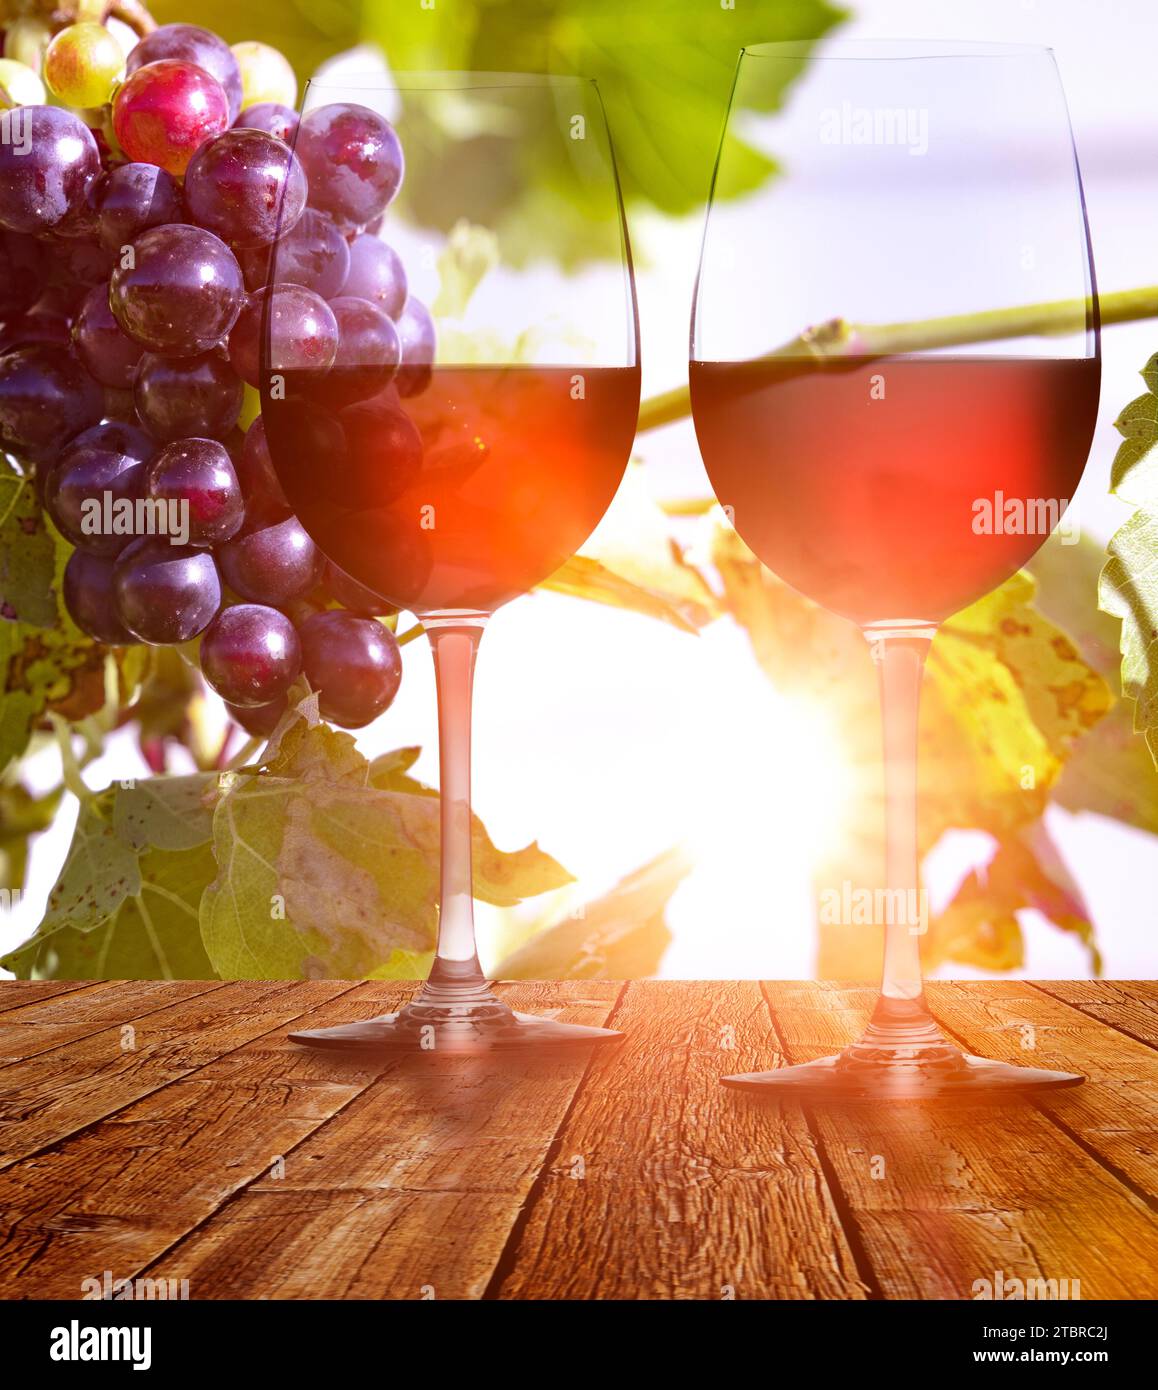 Grapes on the vine with red wine glass against the light Stock Photo